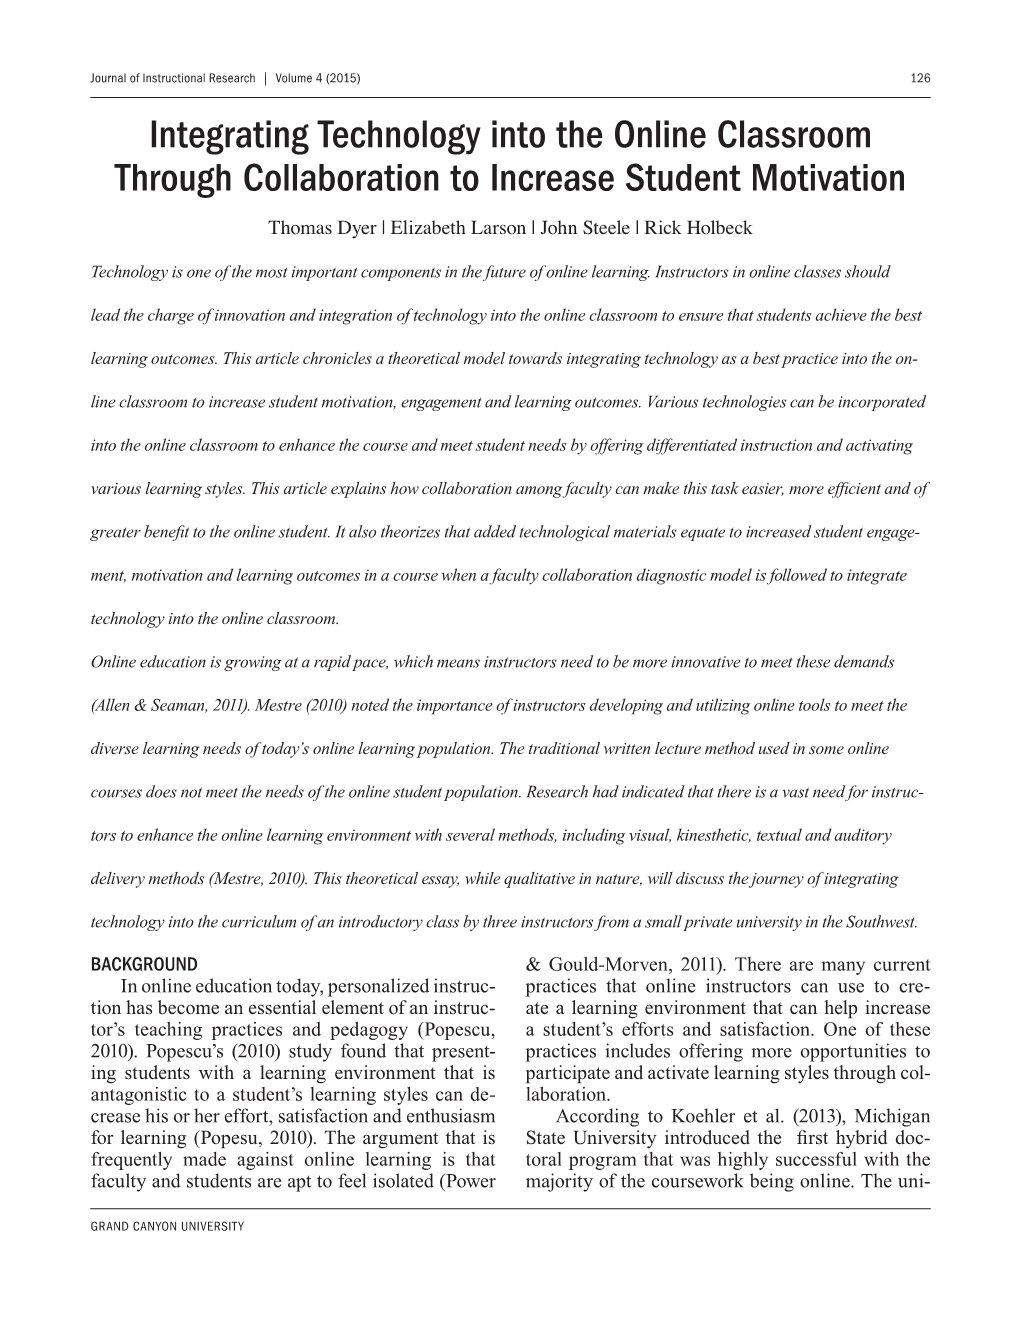 Integrating Technology Into the Online Classroom Through Collaboration to Increase Student Motivation